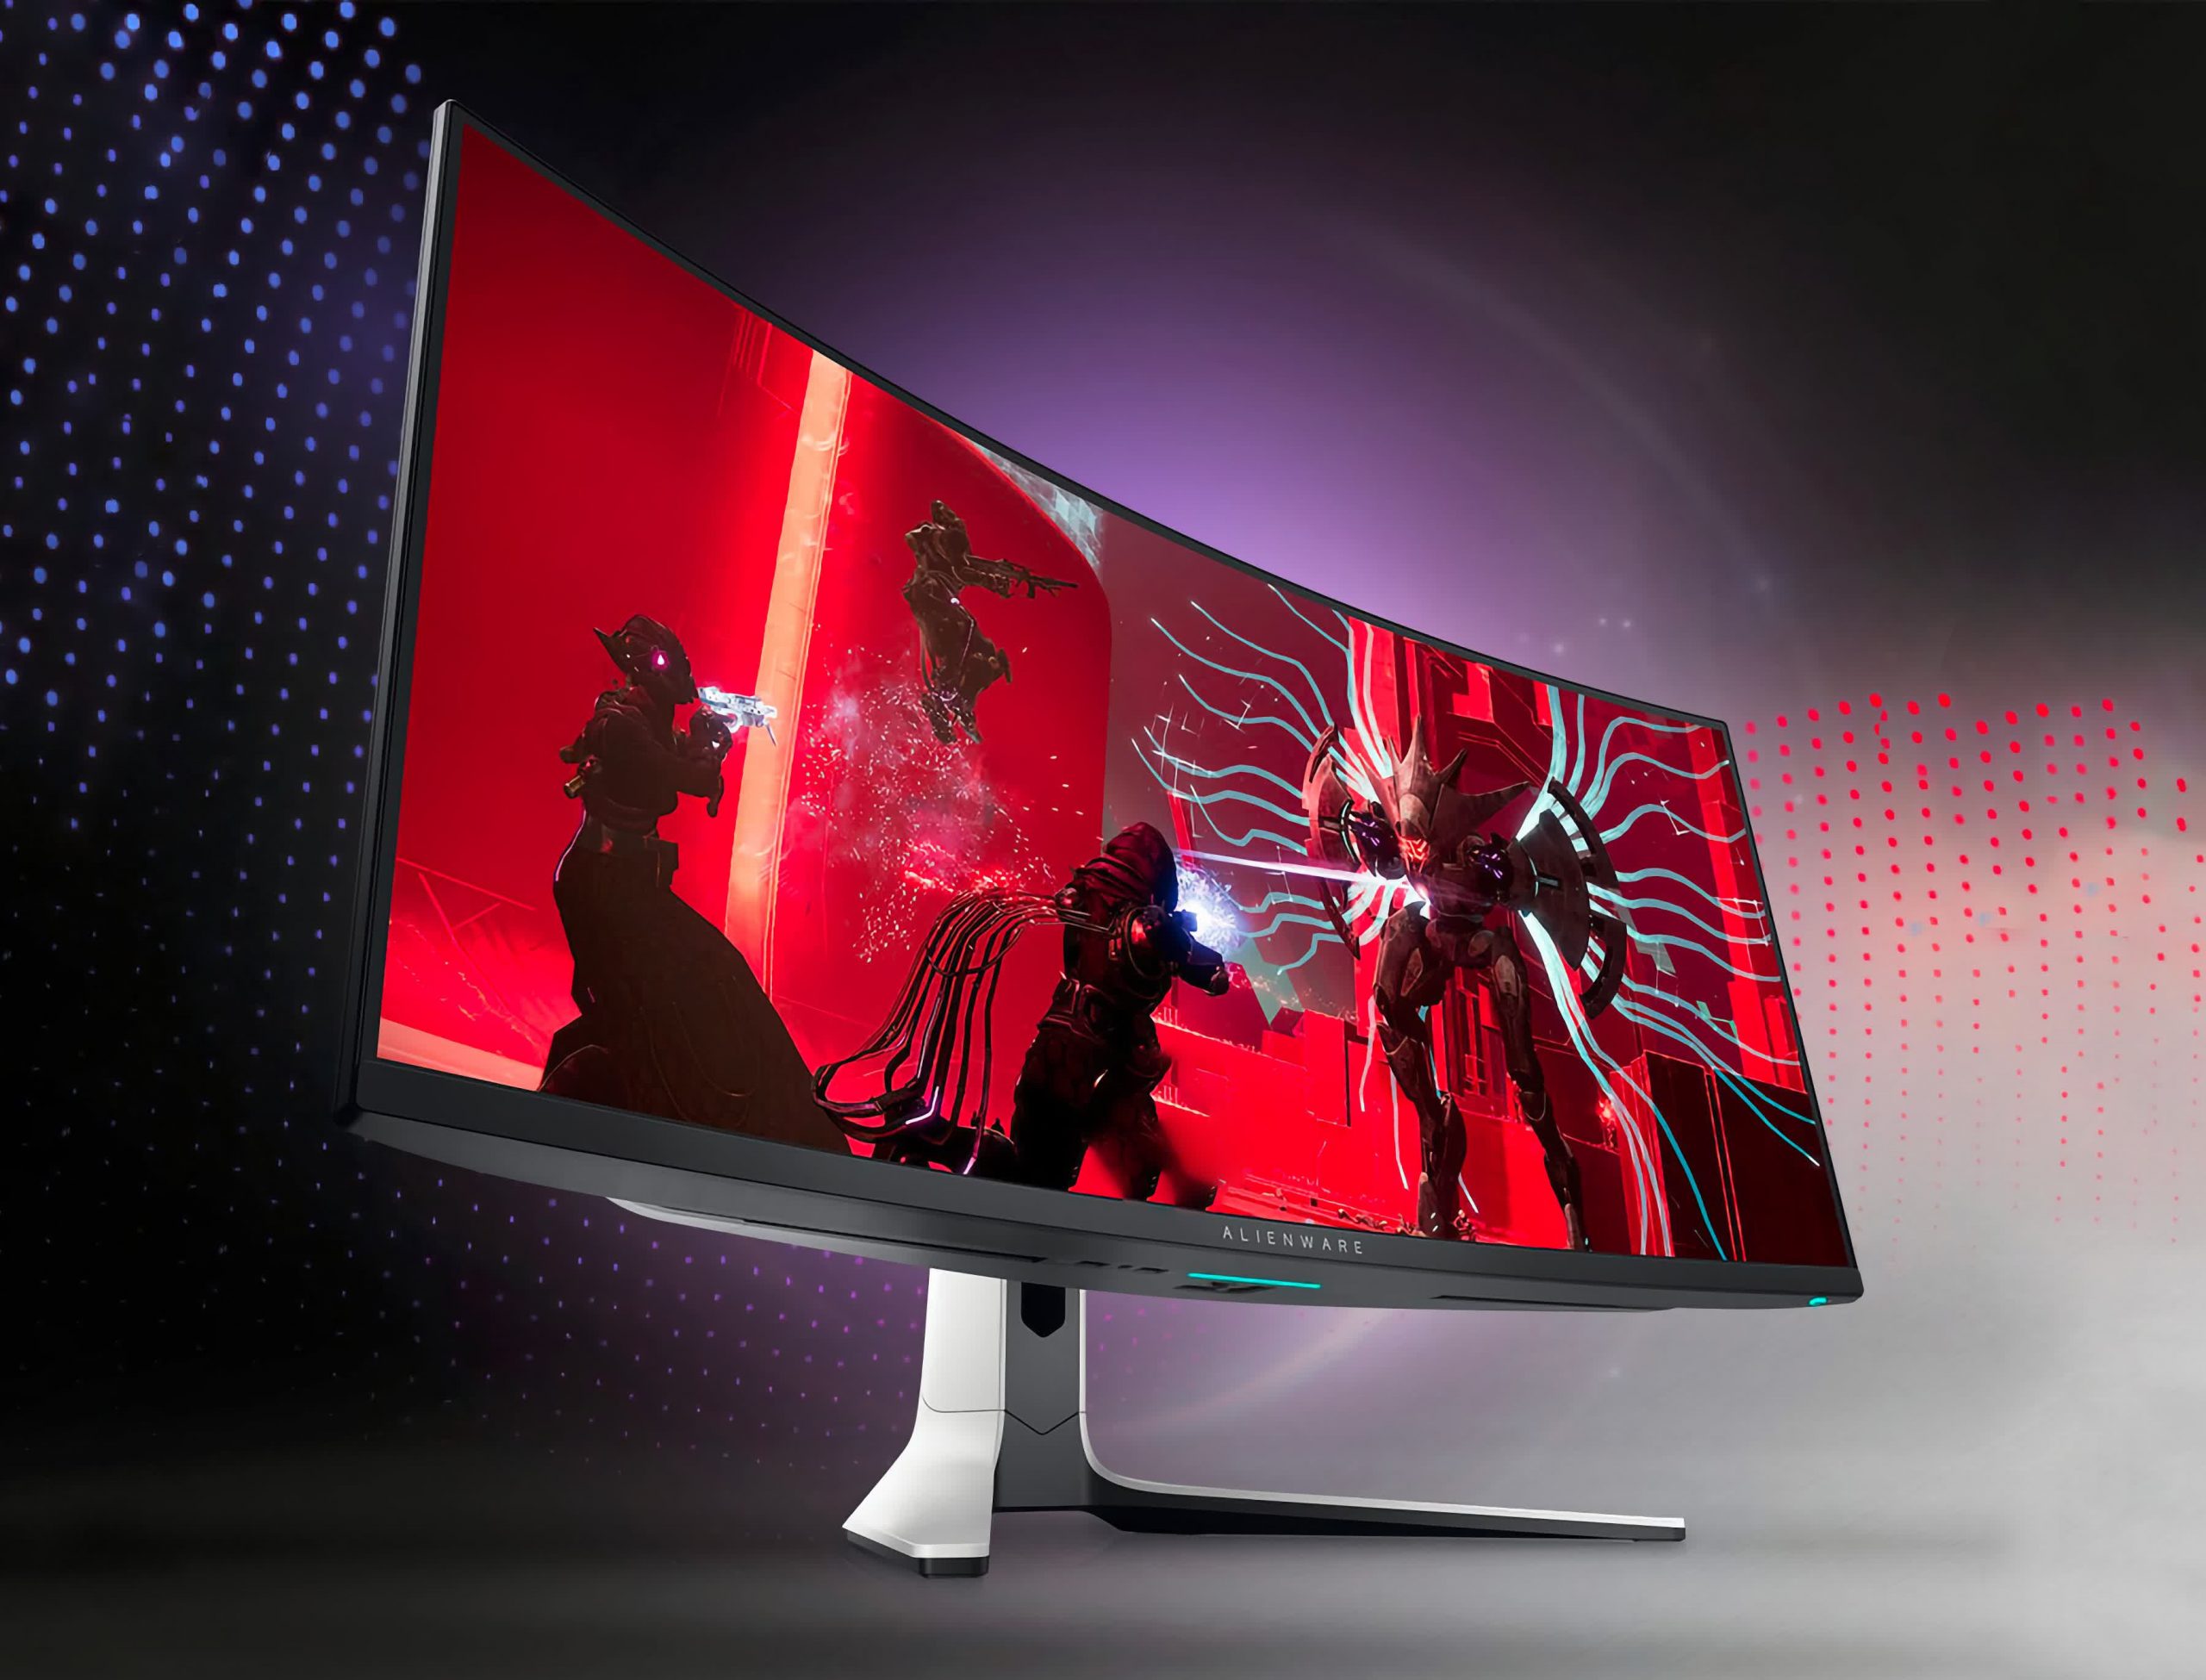 The Best Gaming Monitors… in $100 Increments